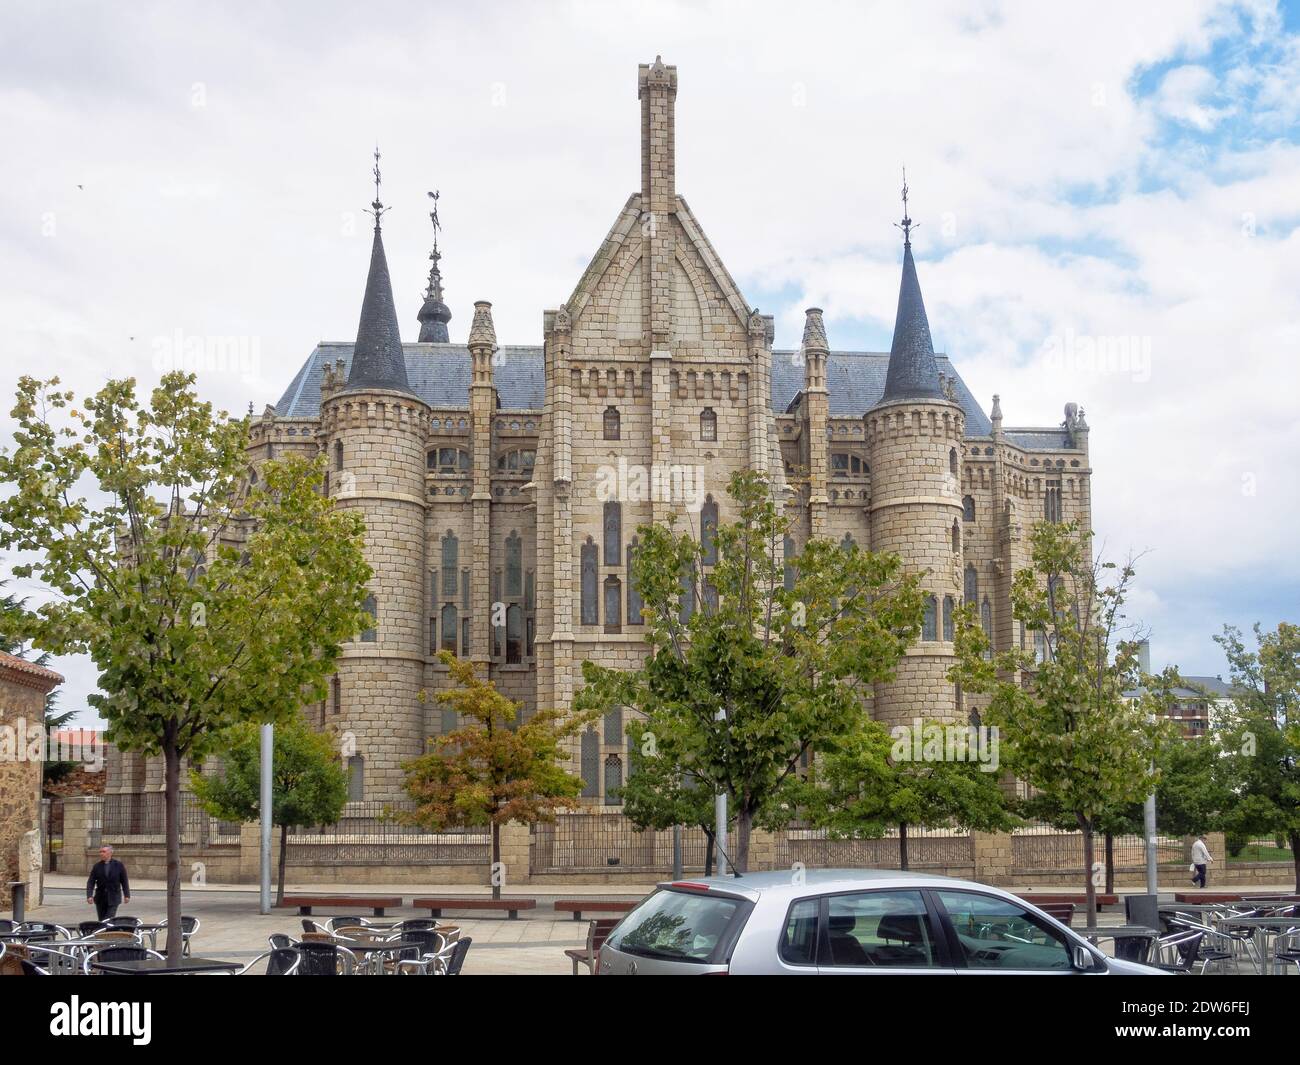 Episcopal Palace was designed in the Catalan Modernism style by Antoni Gaudi and was built between 1889 and 1913 - Astorga, Castile and Leon, Spain Stock Photo